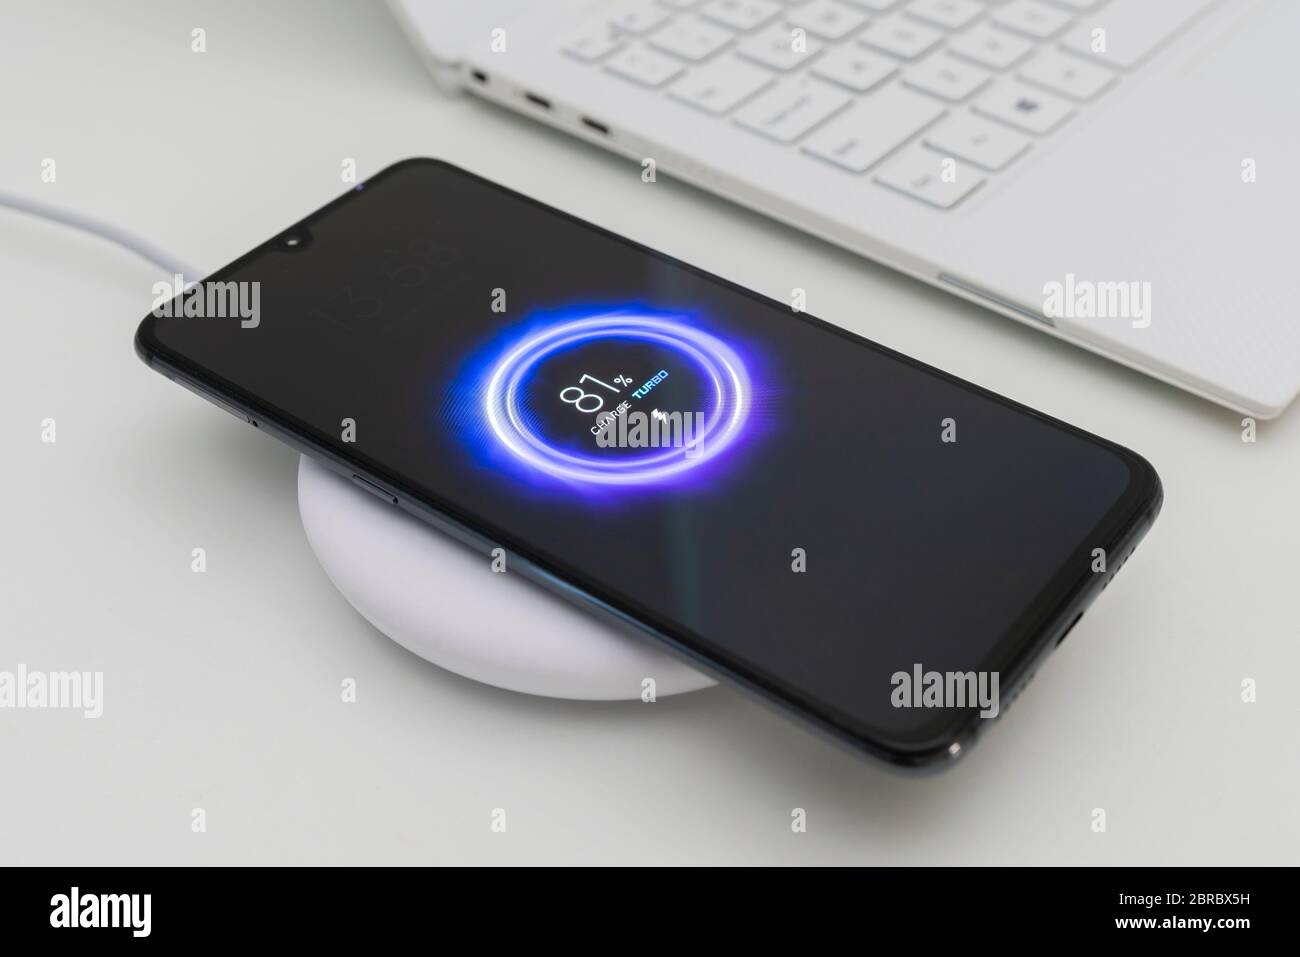 Charging smartphone using wireless charger Stock Photo